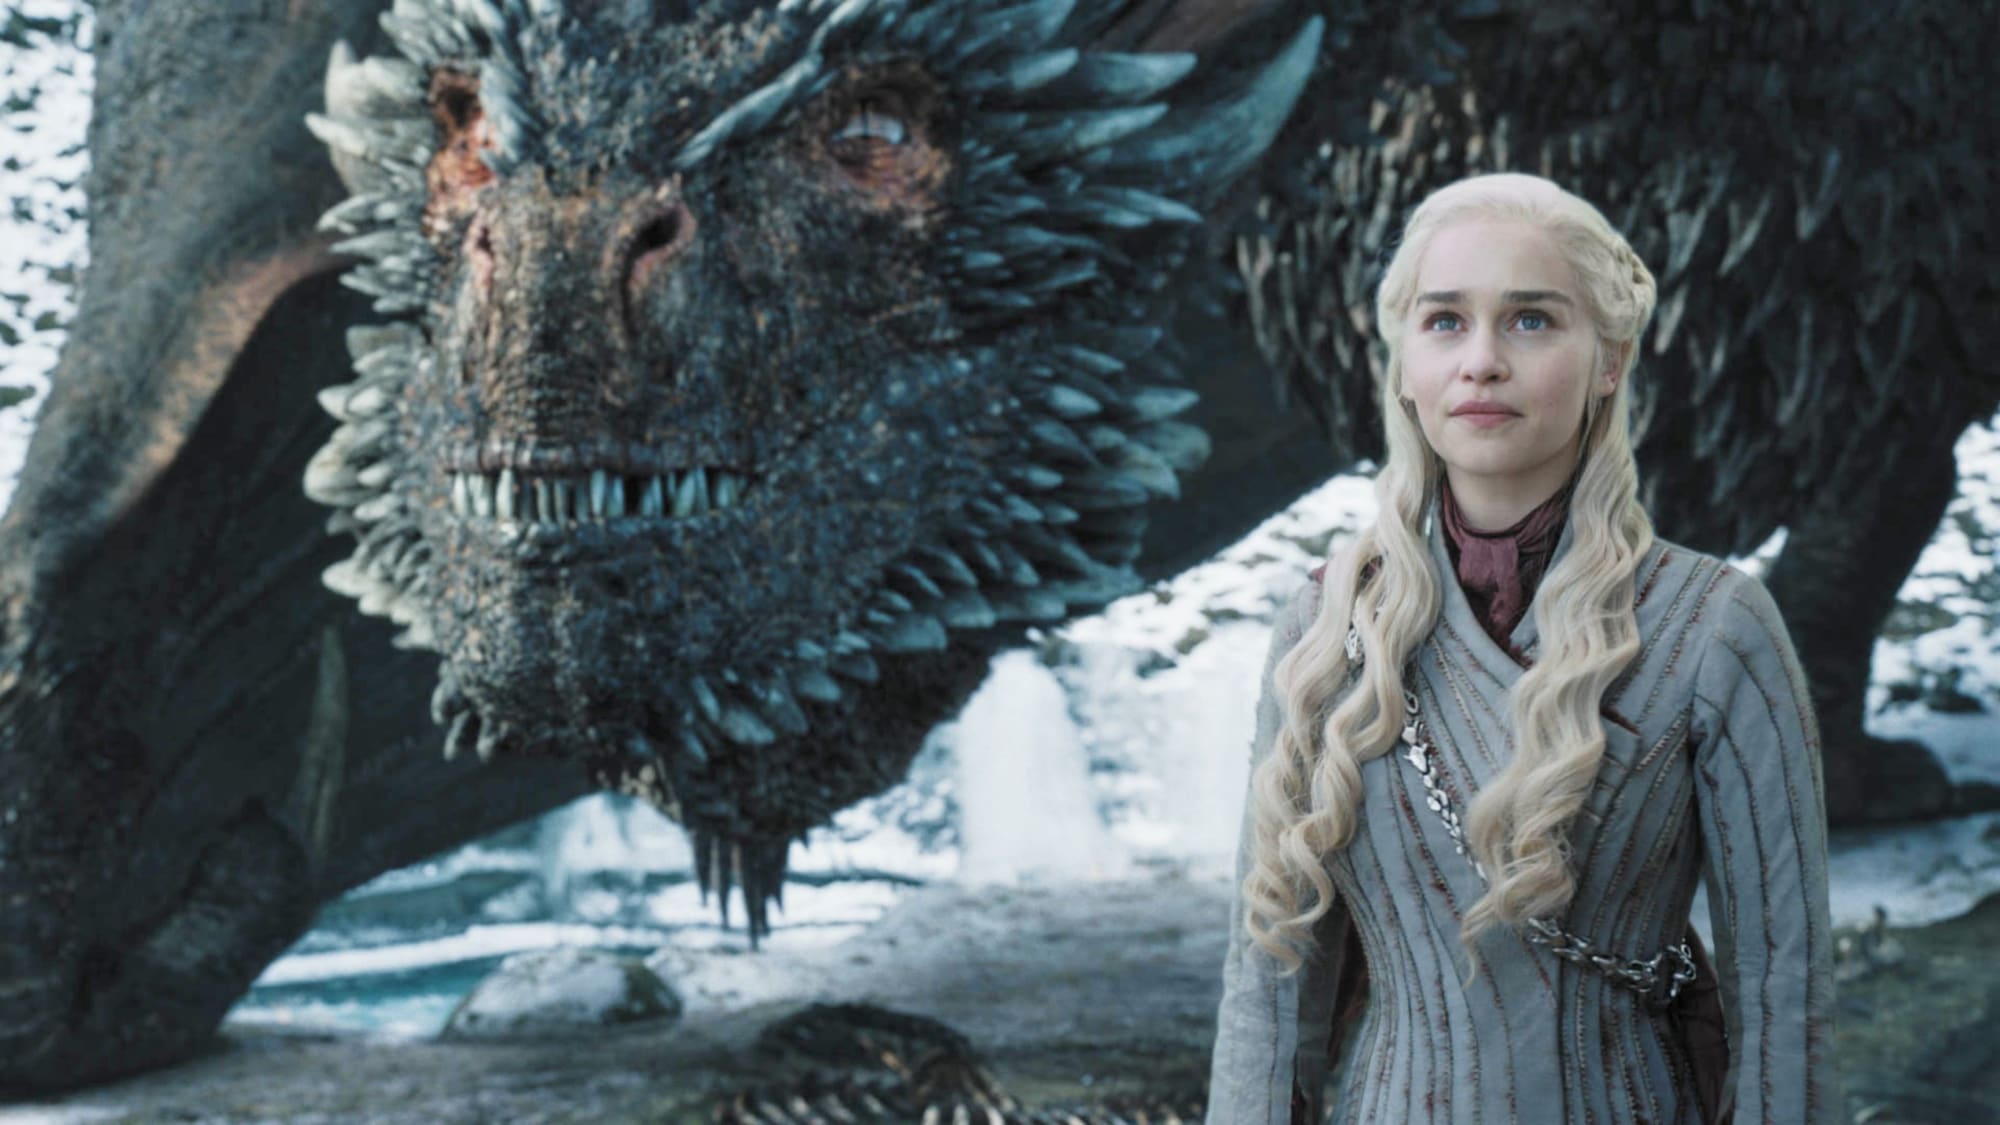 The pros and cons of a Game of Thrones cinematic universe